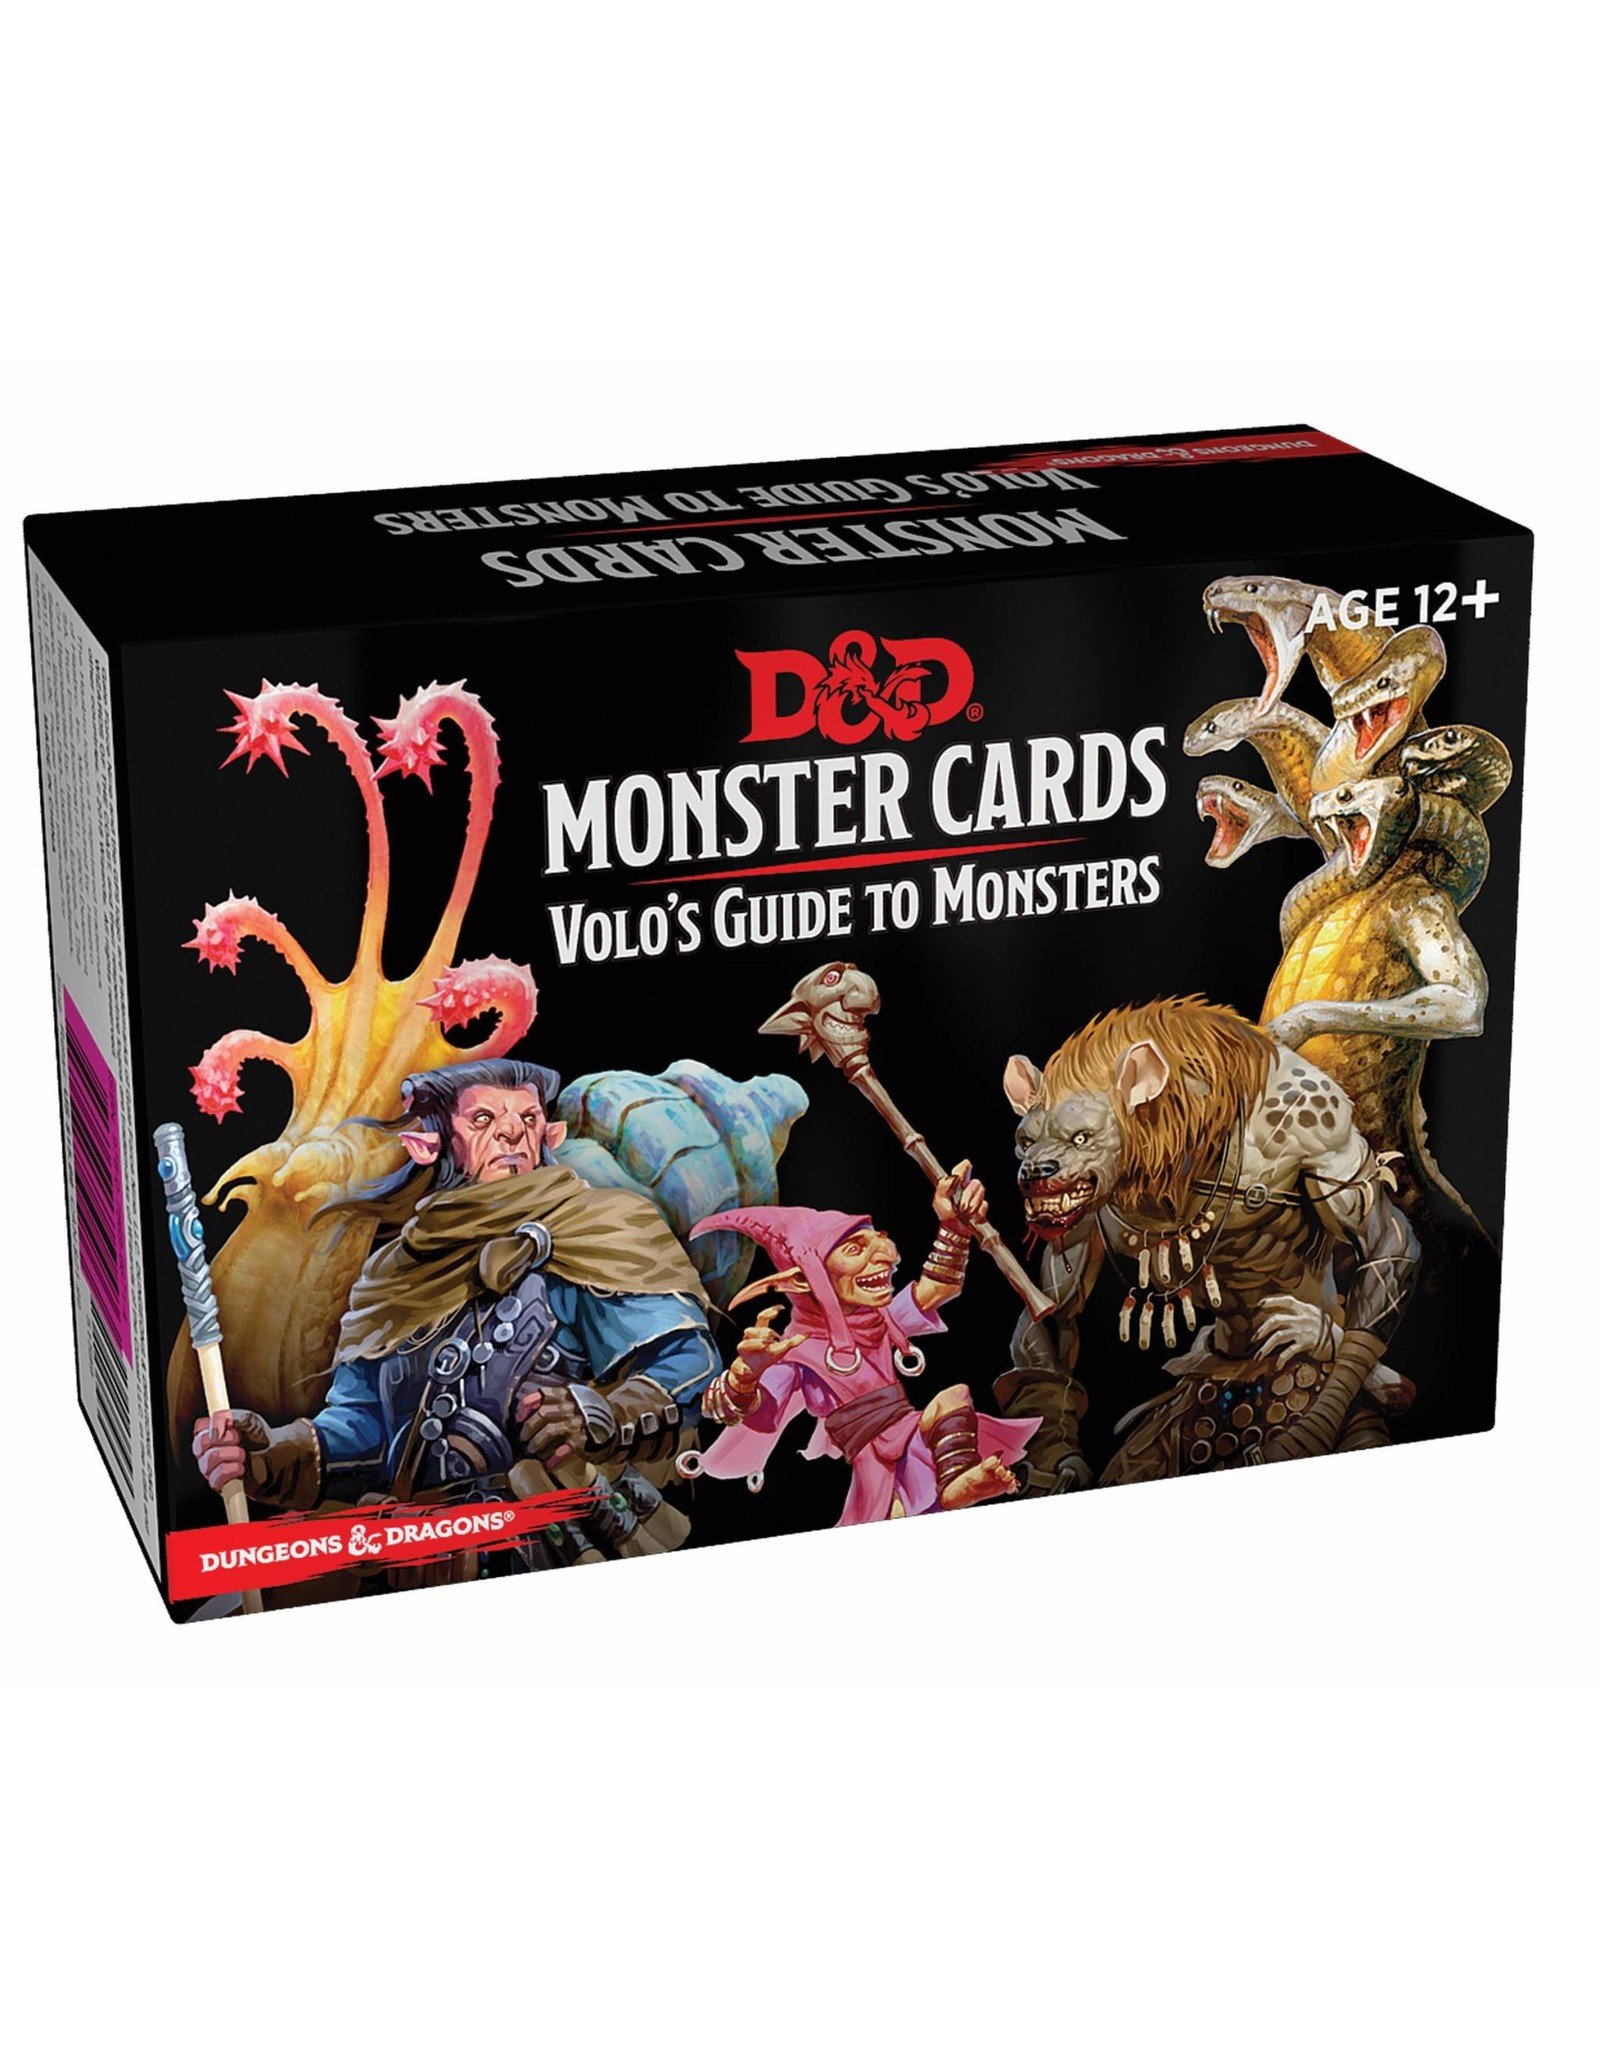 DnD D&D Monster Cards Volos Guide to Monsters